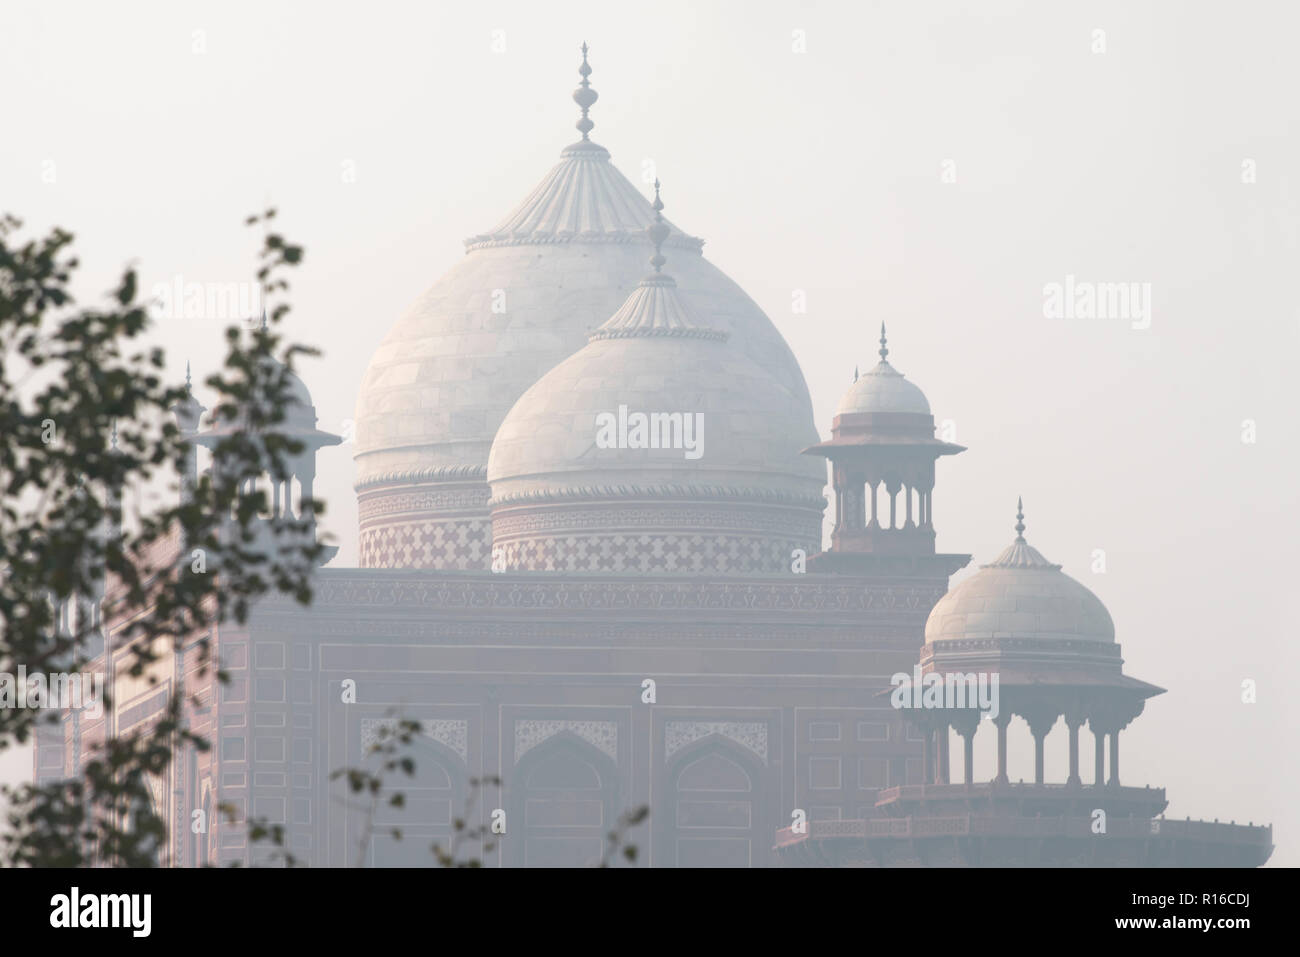 Wonderfully architectured domes of Mihmaan Khana in the complex of Taj Mahal with perfect mughal architecture made of marble stone and appearing huge Stock Photo